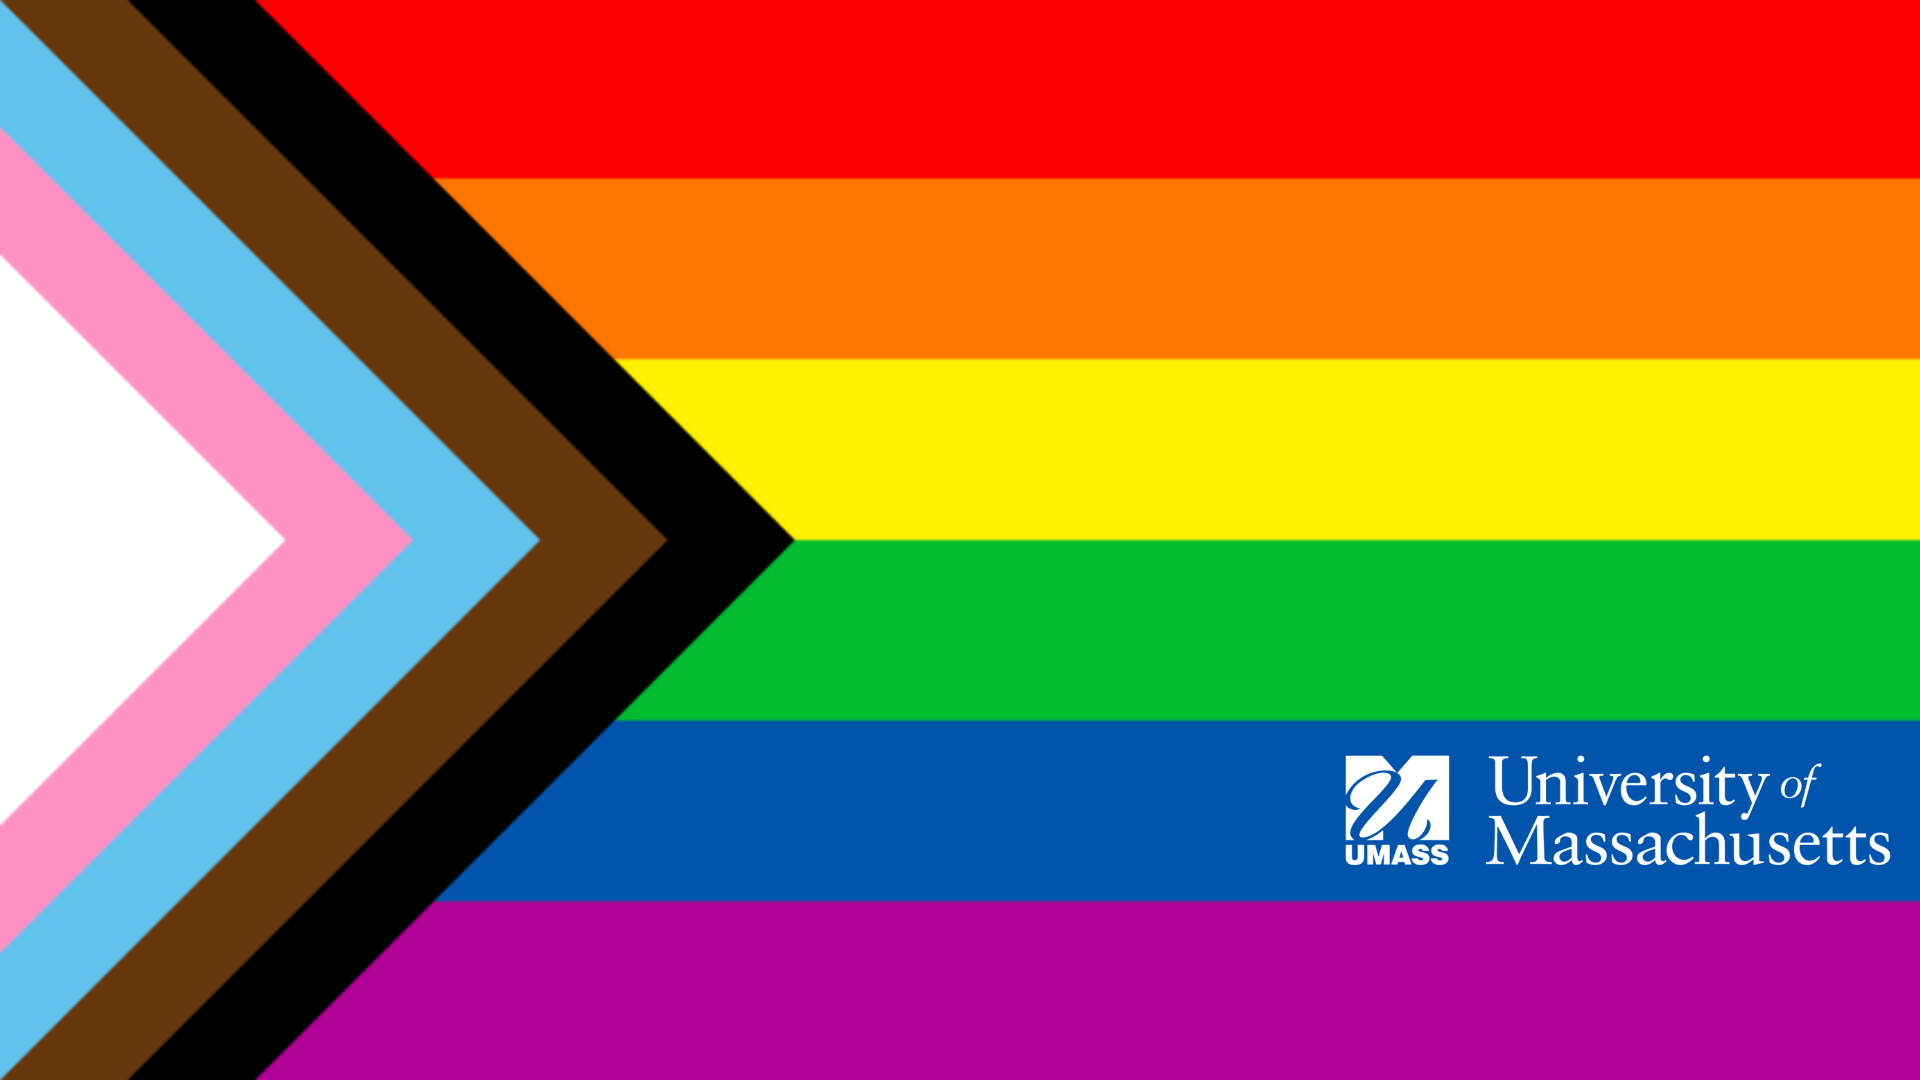 Inclusive Pride flag with UMass System logo in bottom right